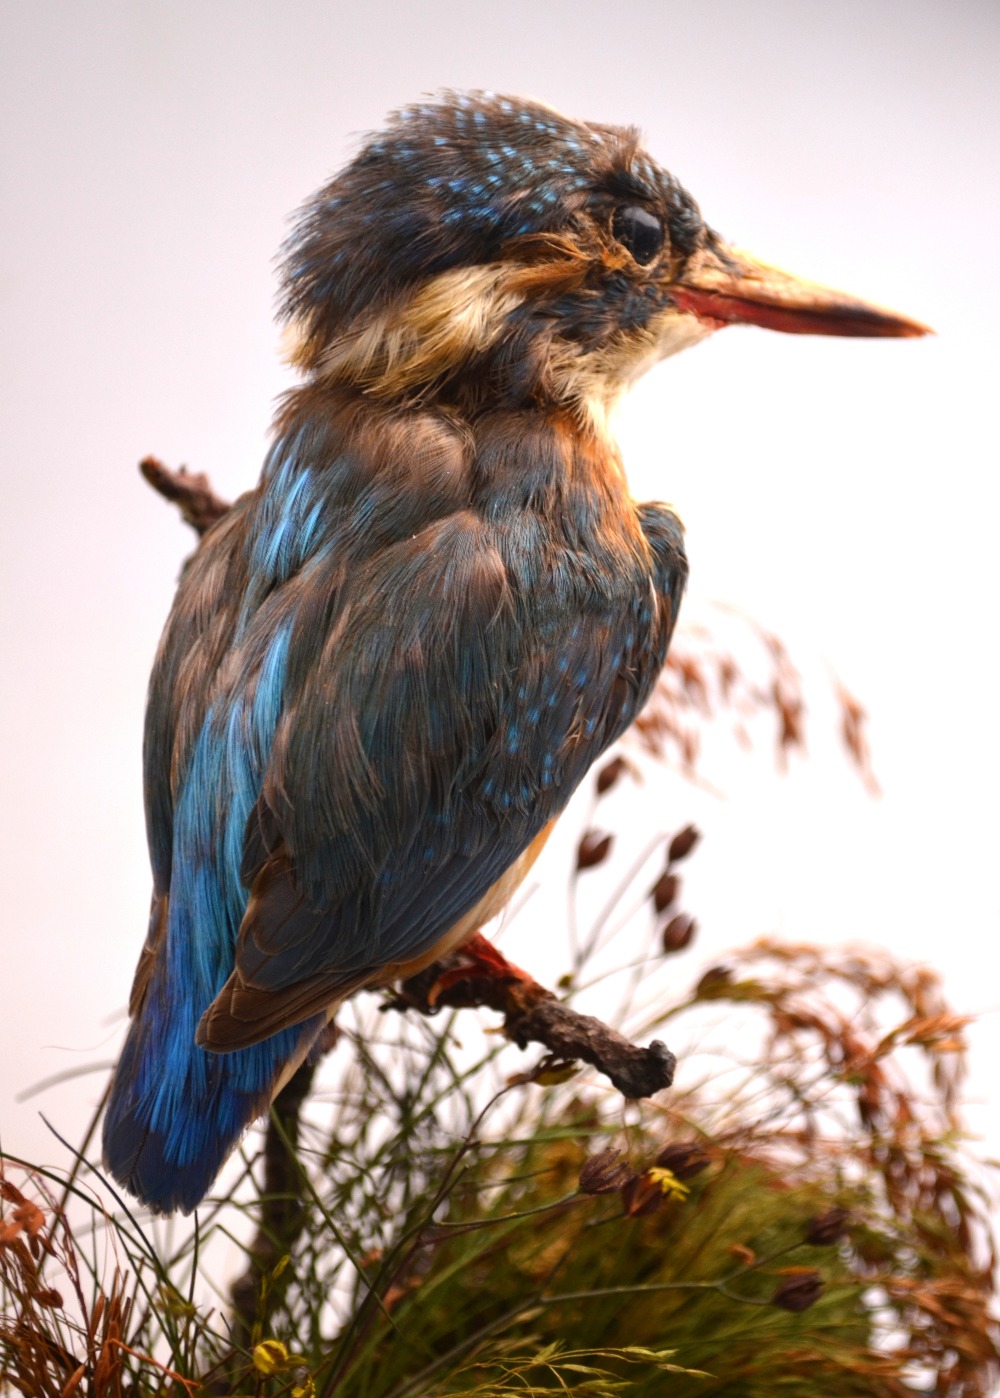 A taxidermy kingfisher, under a domed case in naturalistic setting, - Image 3 of 4